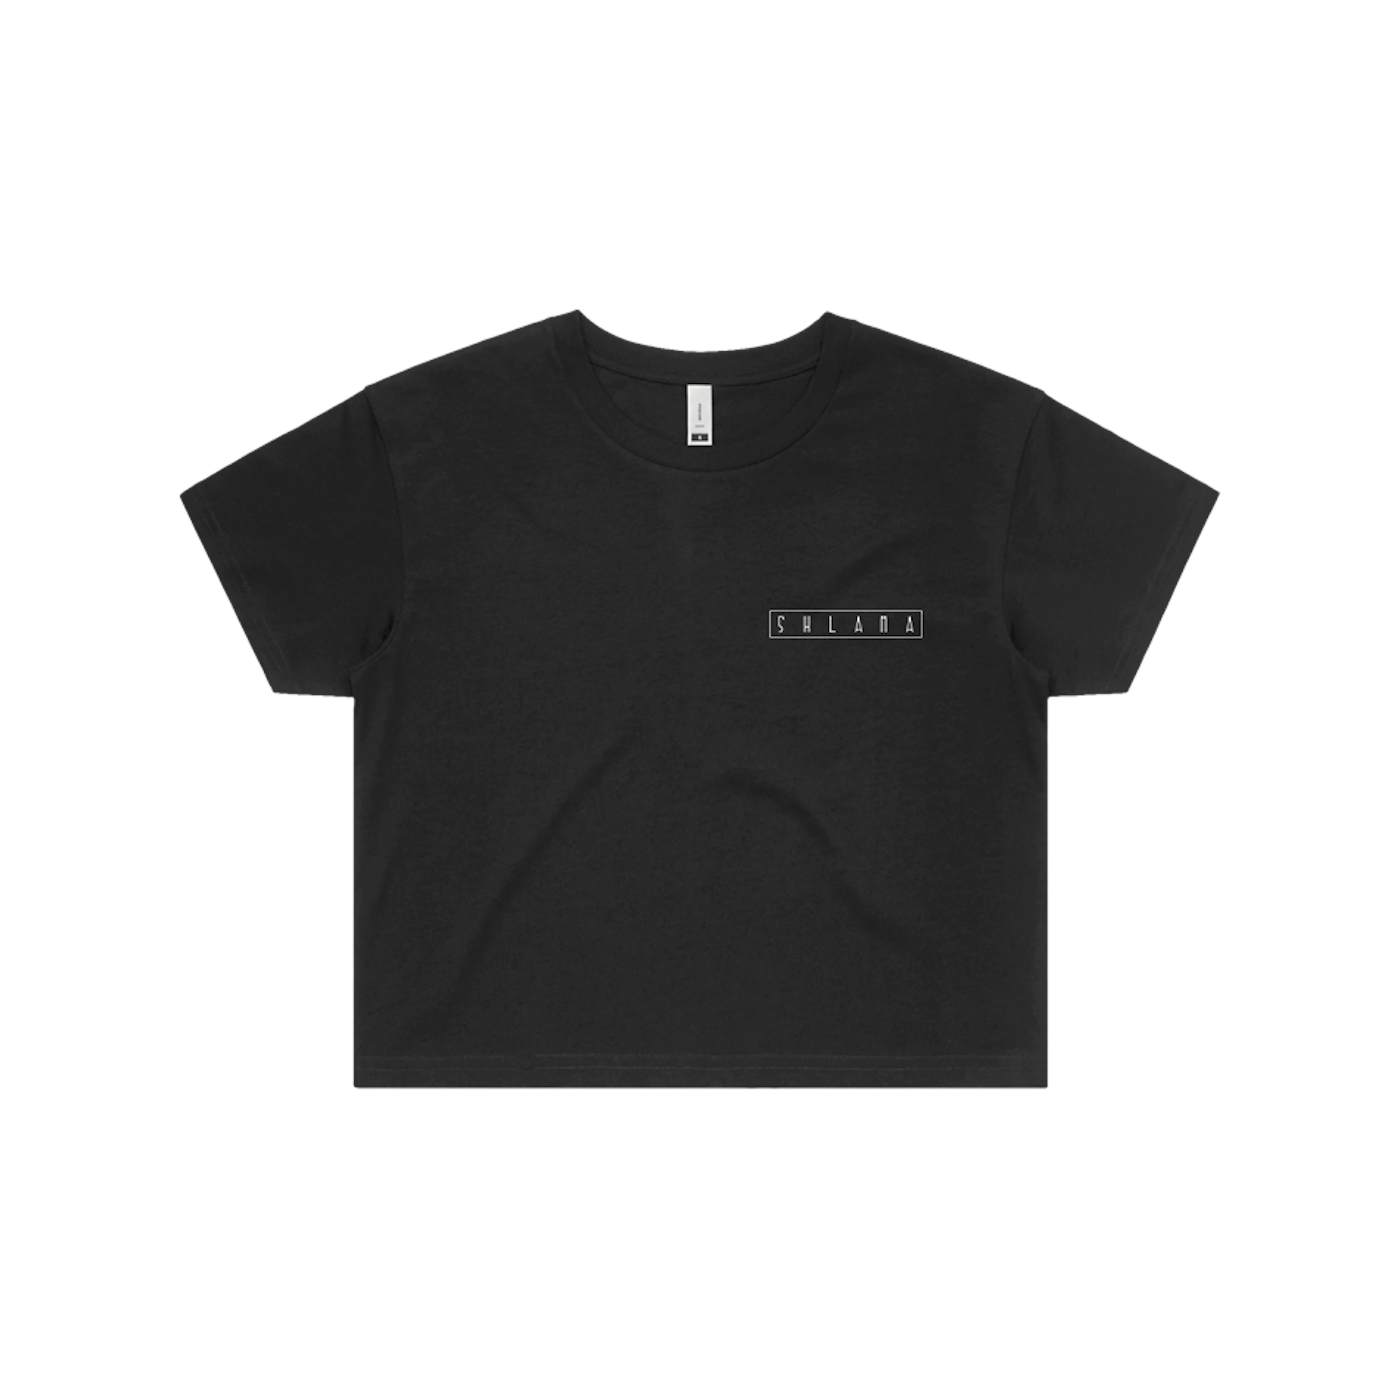 Soft Cactus "The Shlama Collection" Crop T-Shirt